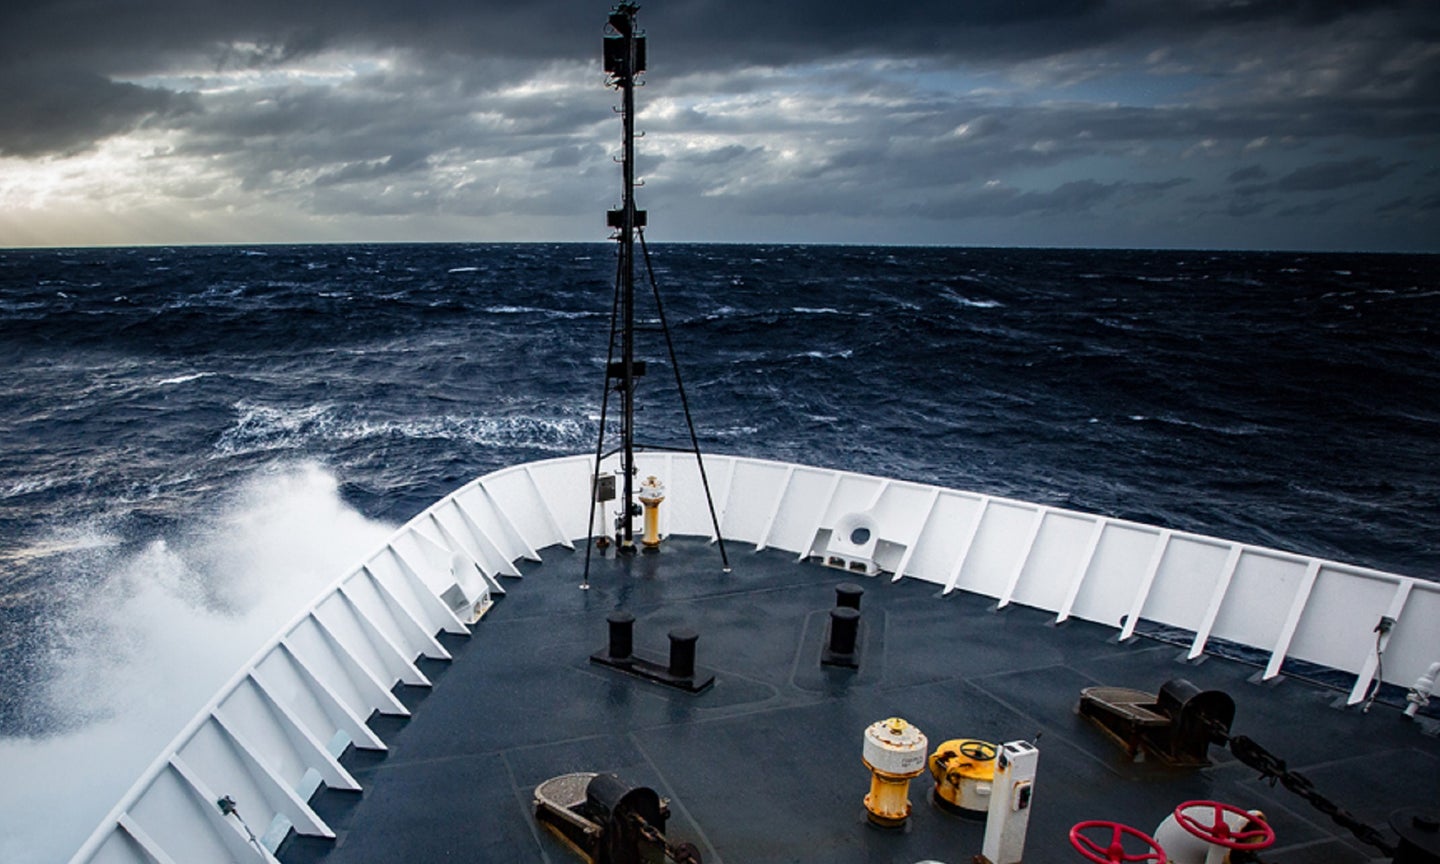 Pacific Ocean storm seen from a research vessel's stern